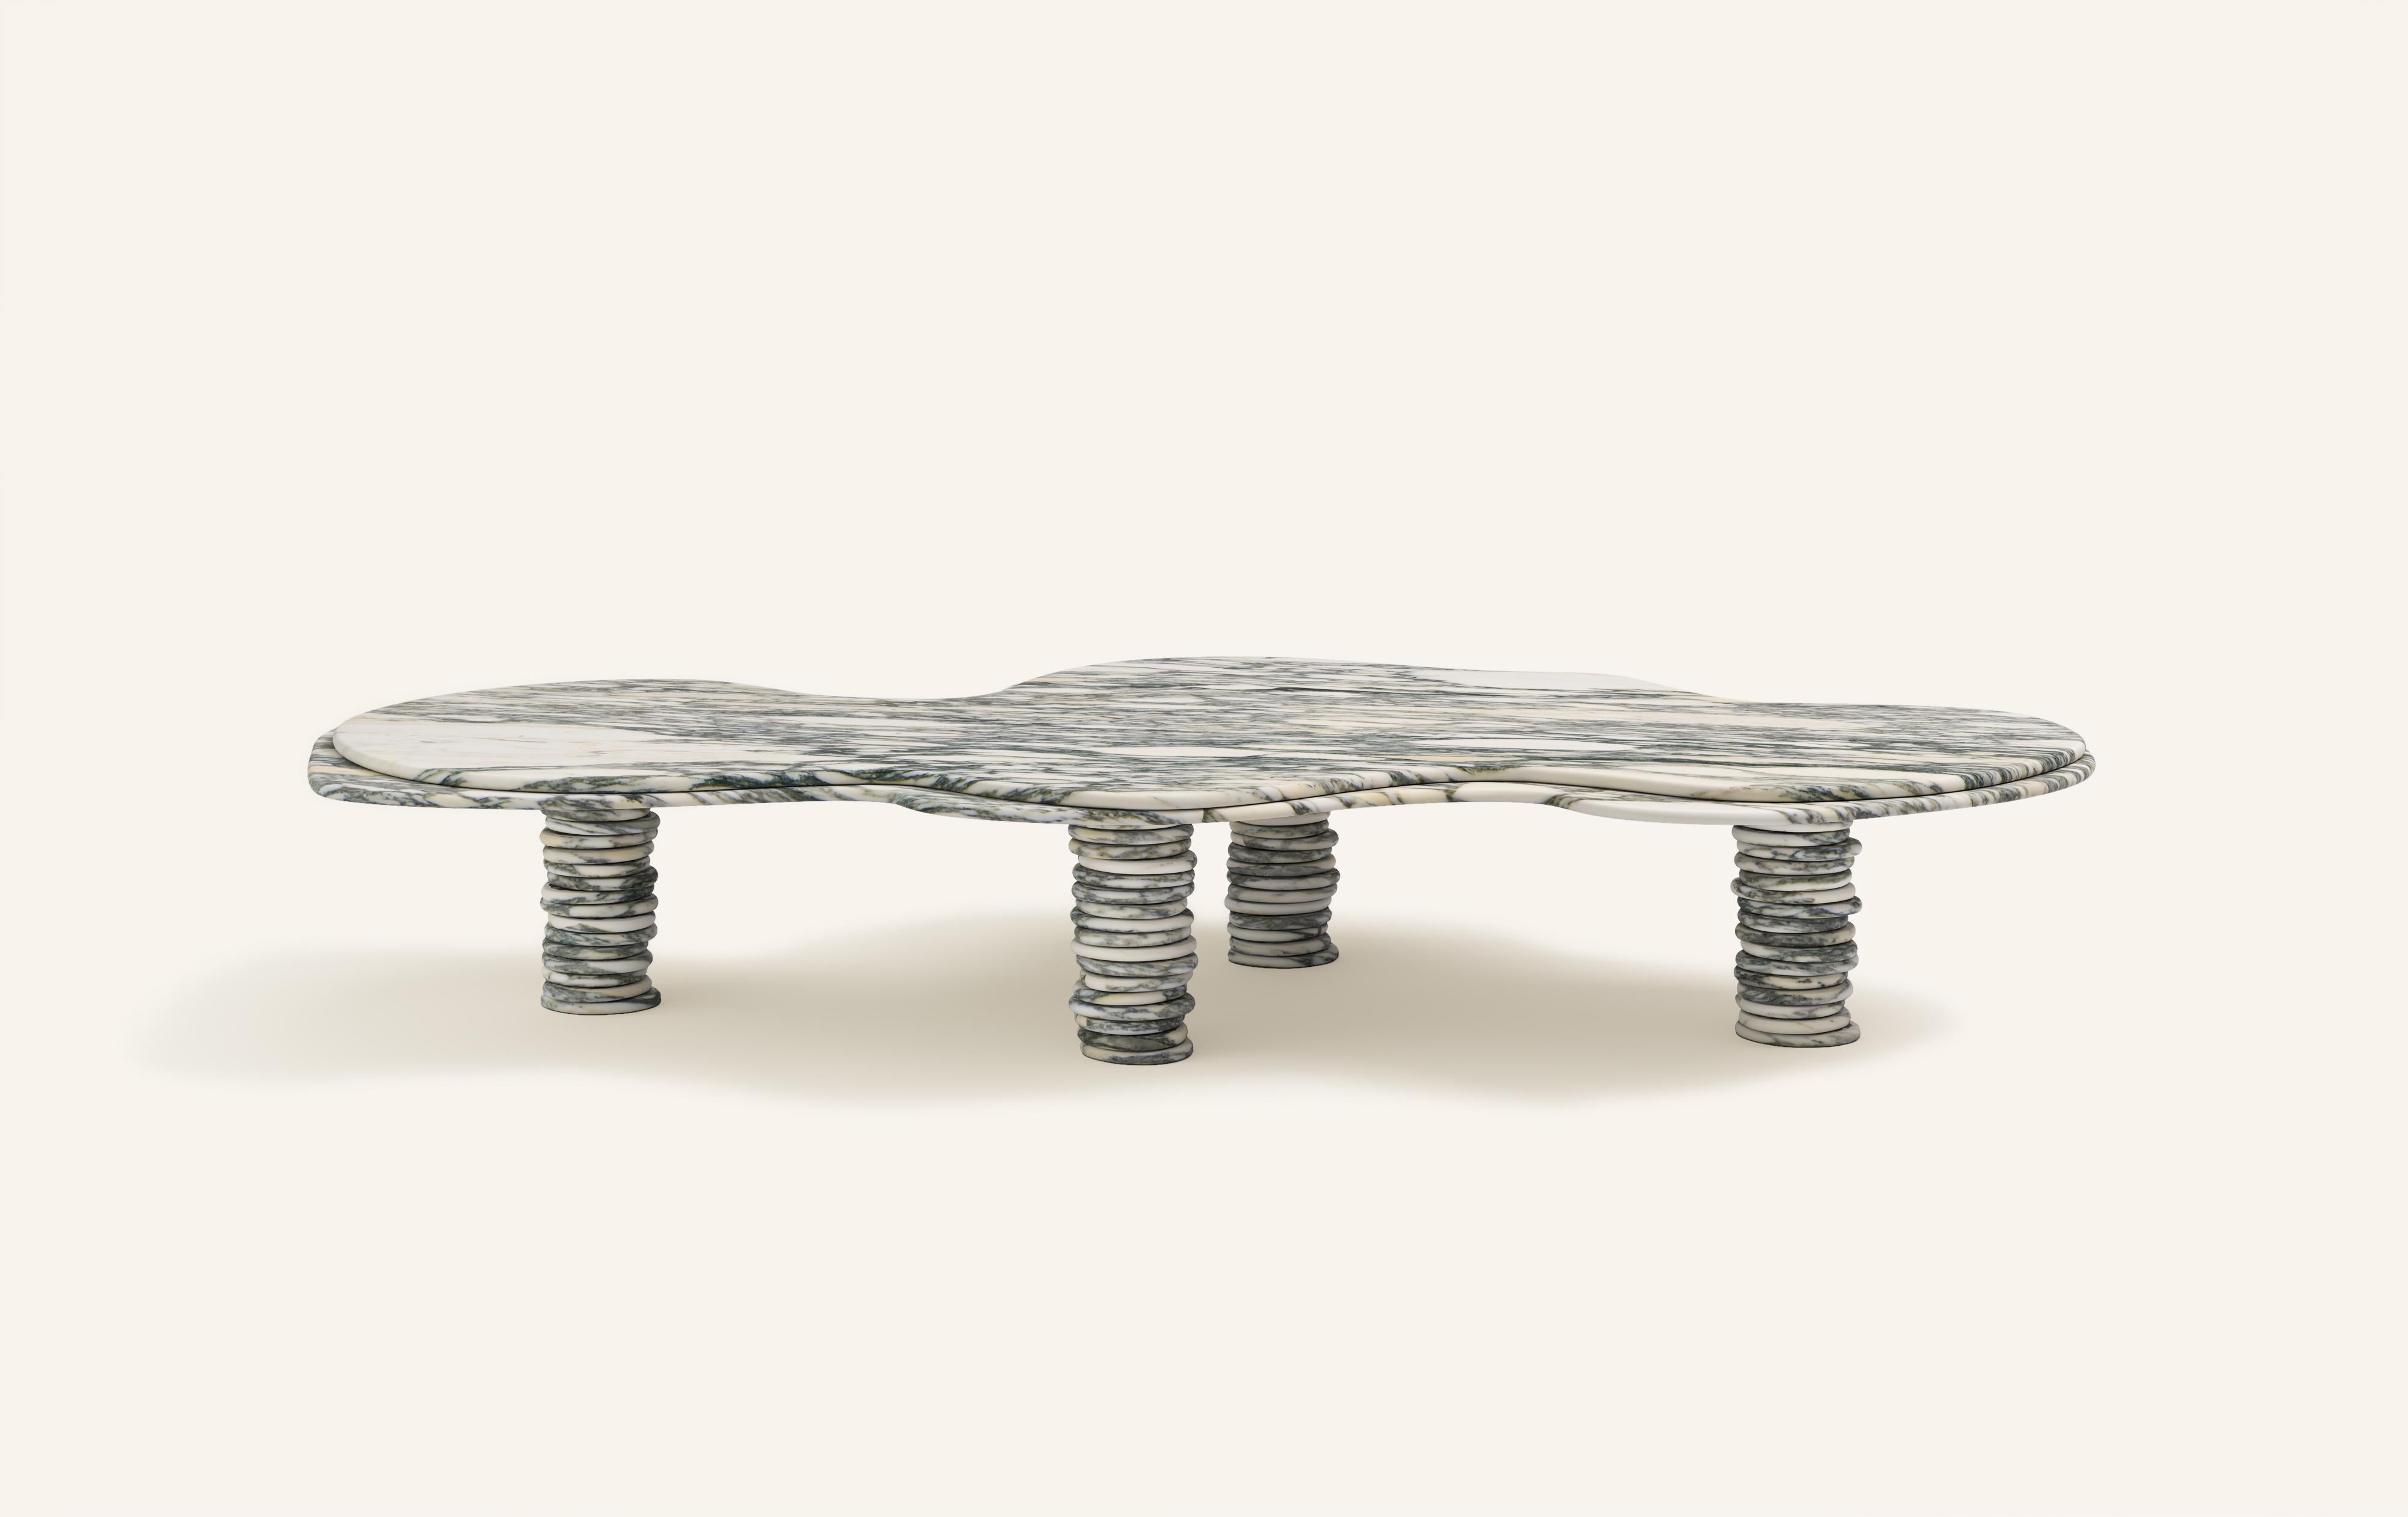 'ONDA', ITALIAN FOR 'WAVE', HAS INSPIRED A FREEFORM ORGANIC BODY, HEROING A COMPLEX AND TEXTURED COLLECTION. COMPRISING SIDE TABLES FOR LAYERING, COFFEE TABLES AND DINING TABLES.

DIMENSIONS:
72”L x 39-1/2”W x 14-3/16”H: 
- 1.5